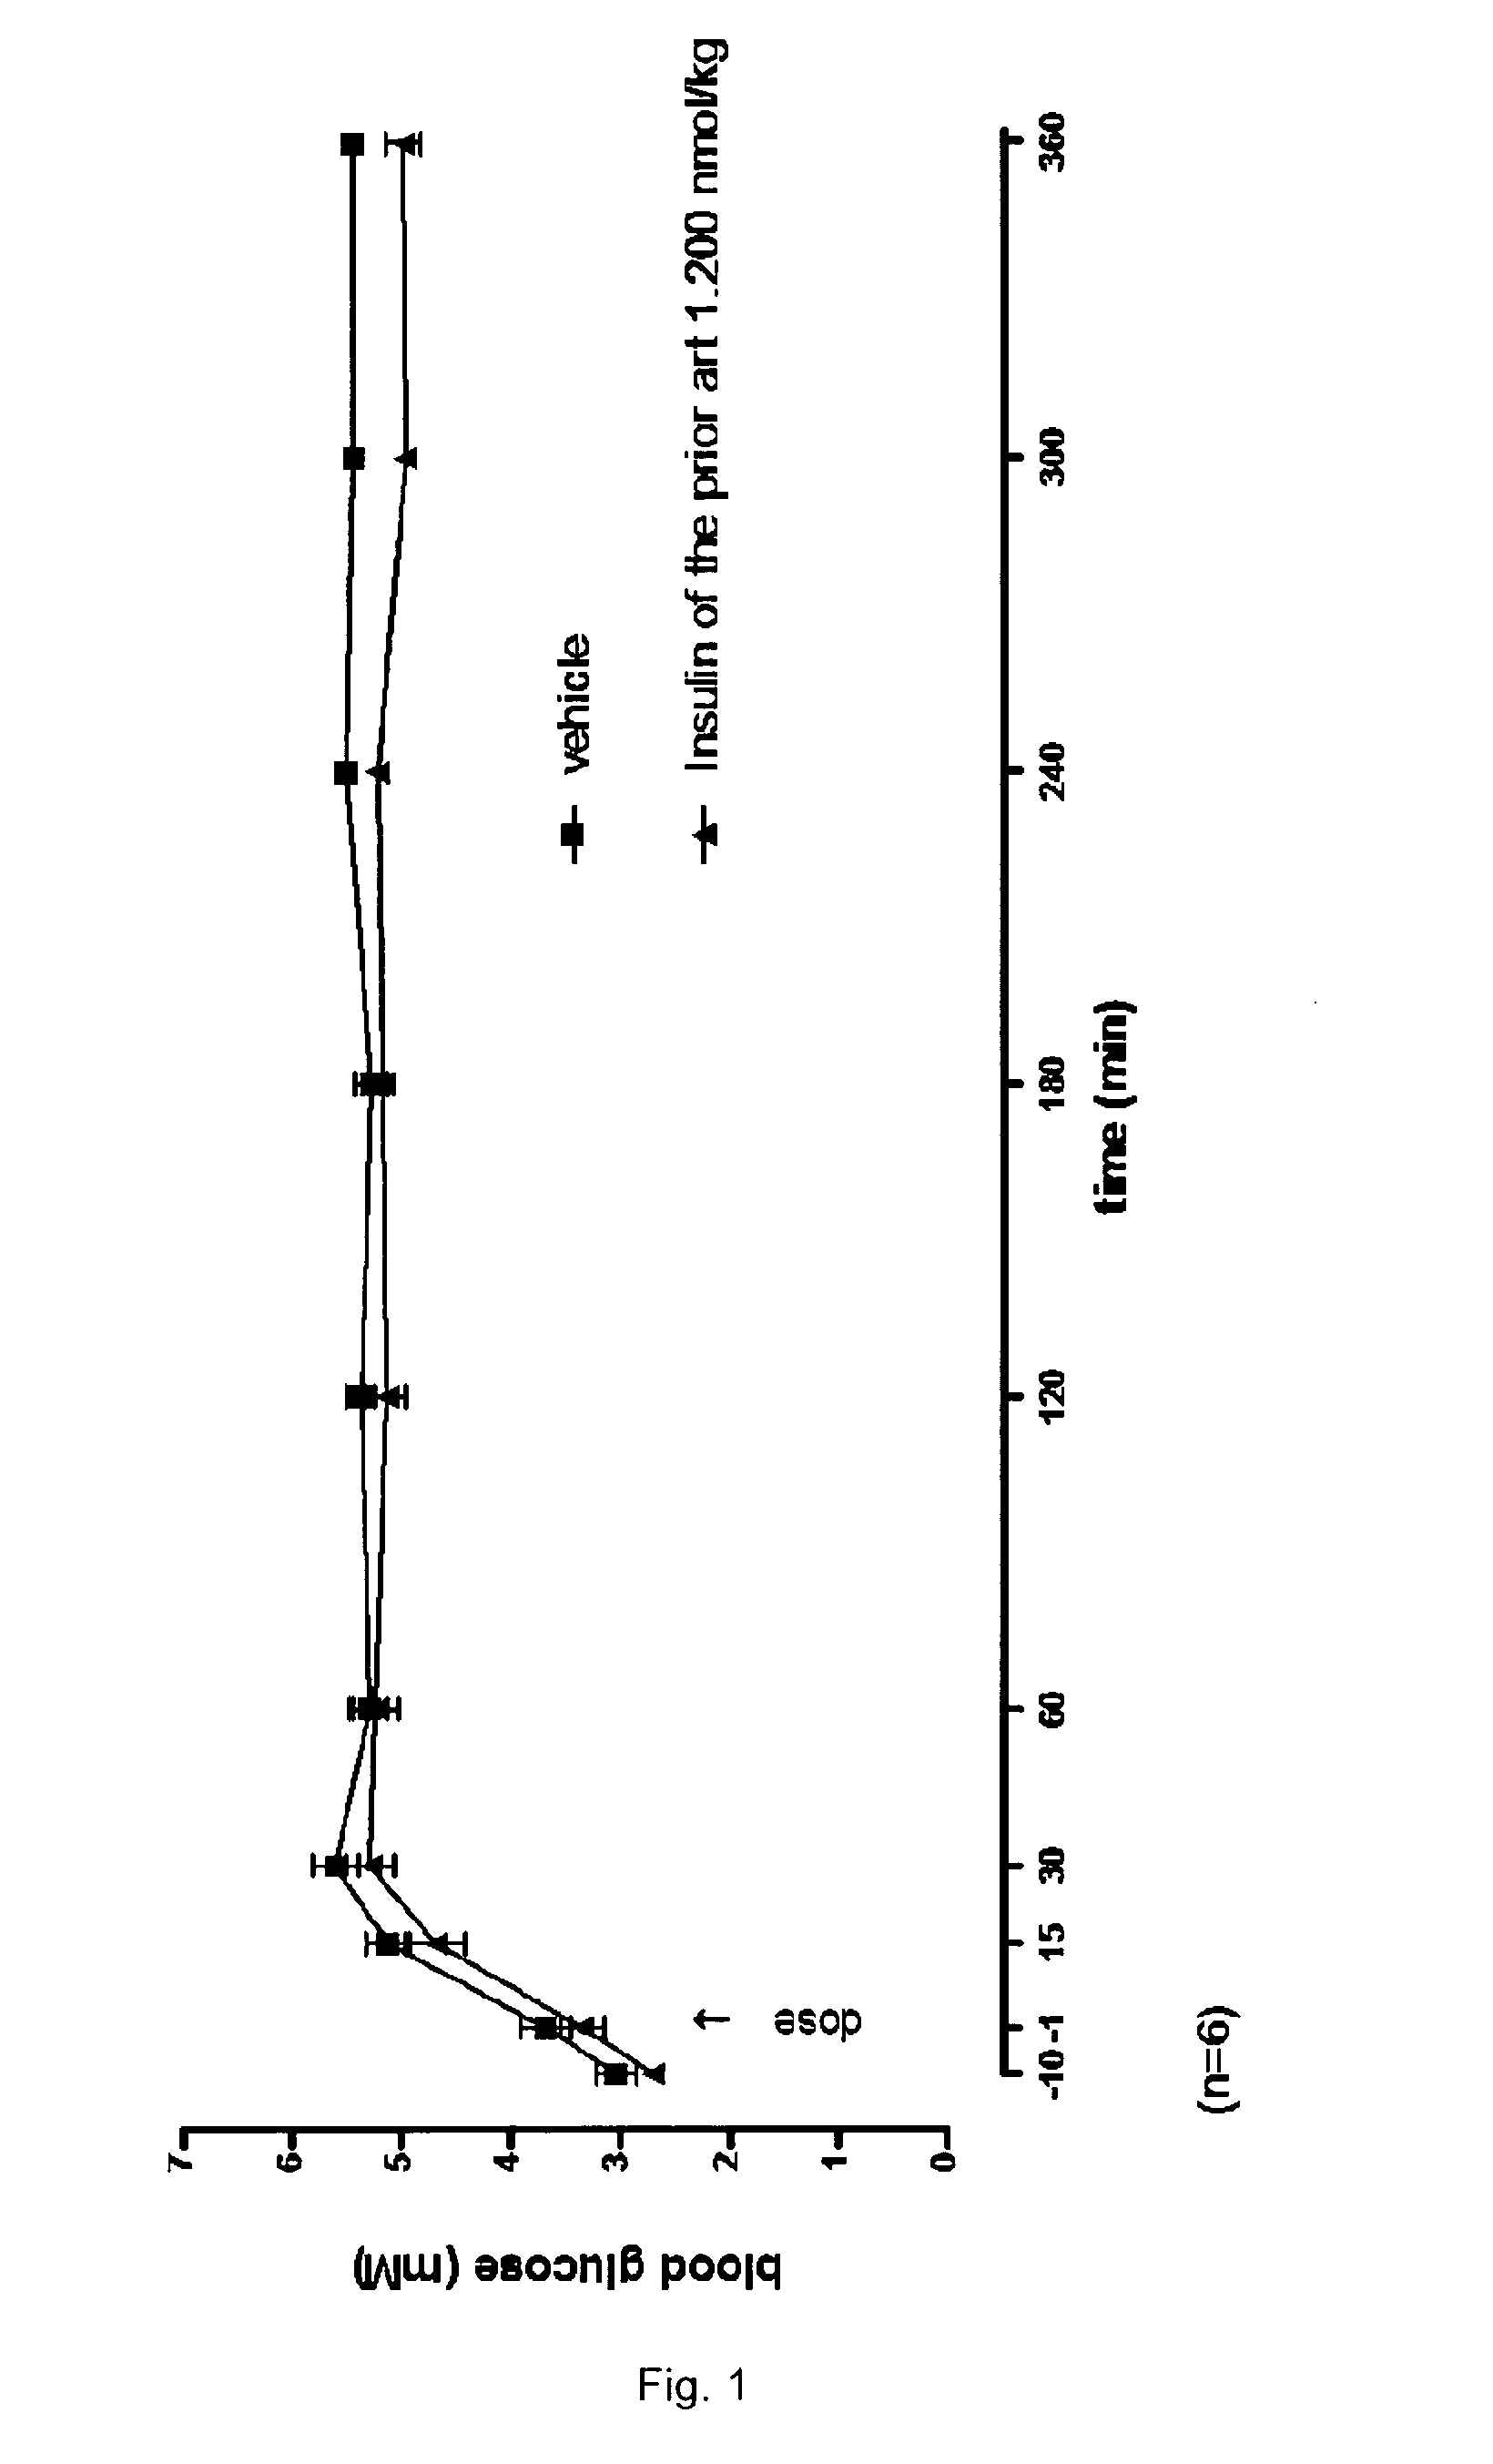 Protease stabilized, acylated insulin analogues